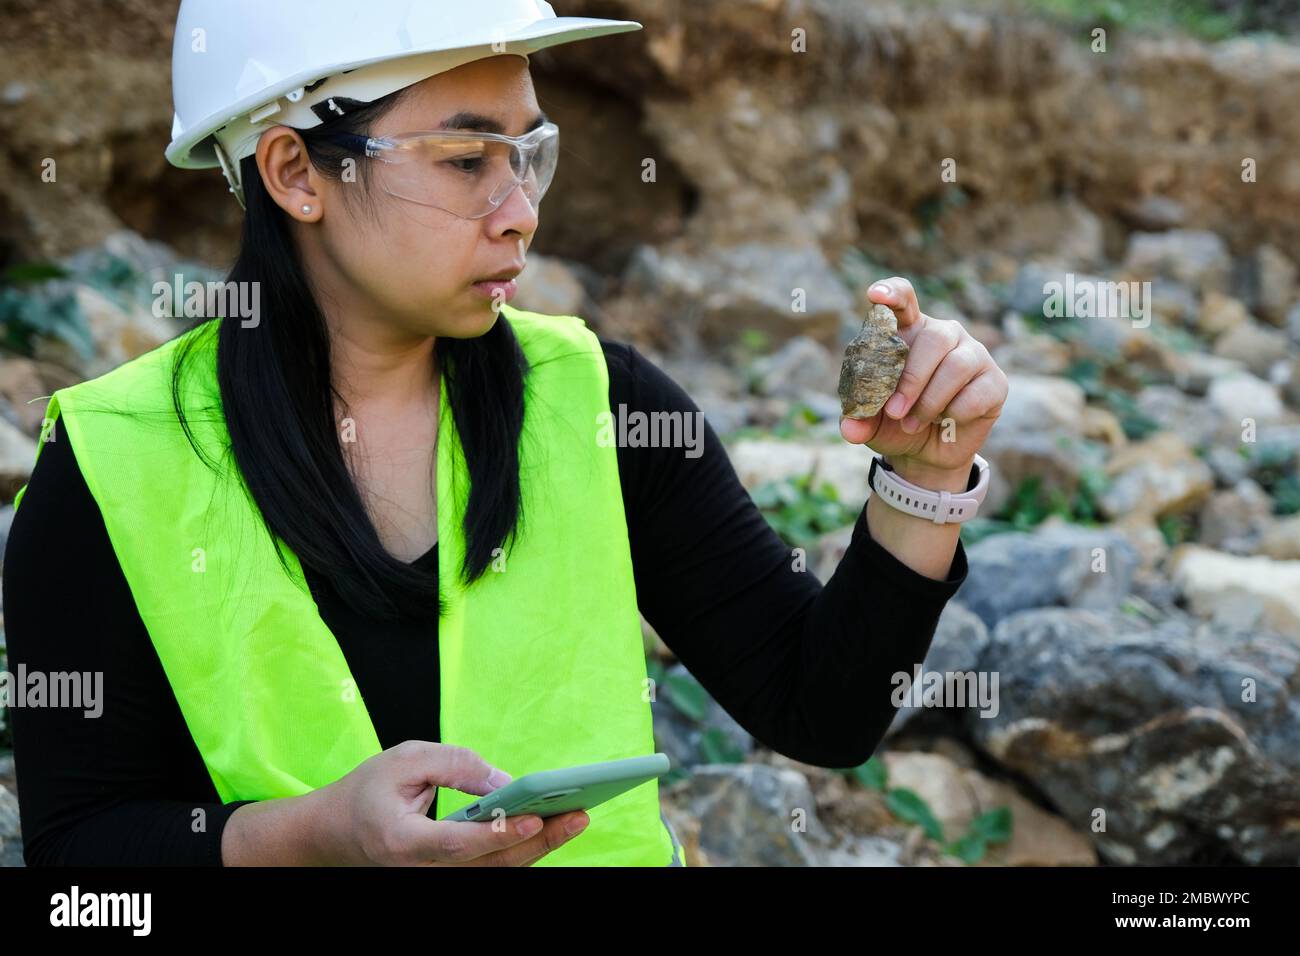 Female geologist using mobile phone to record data analyzing rocks or gravel. Researchers collect samples of biological materials. Environmental and e Stock Photo